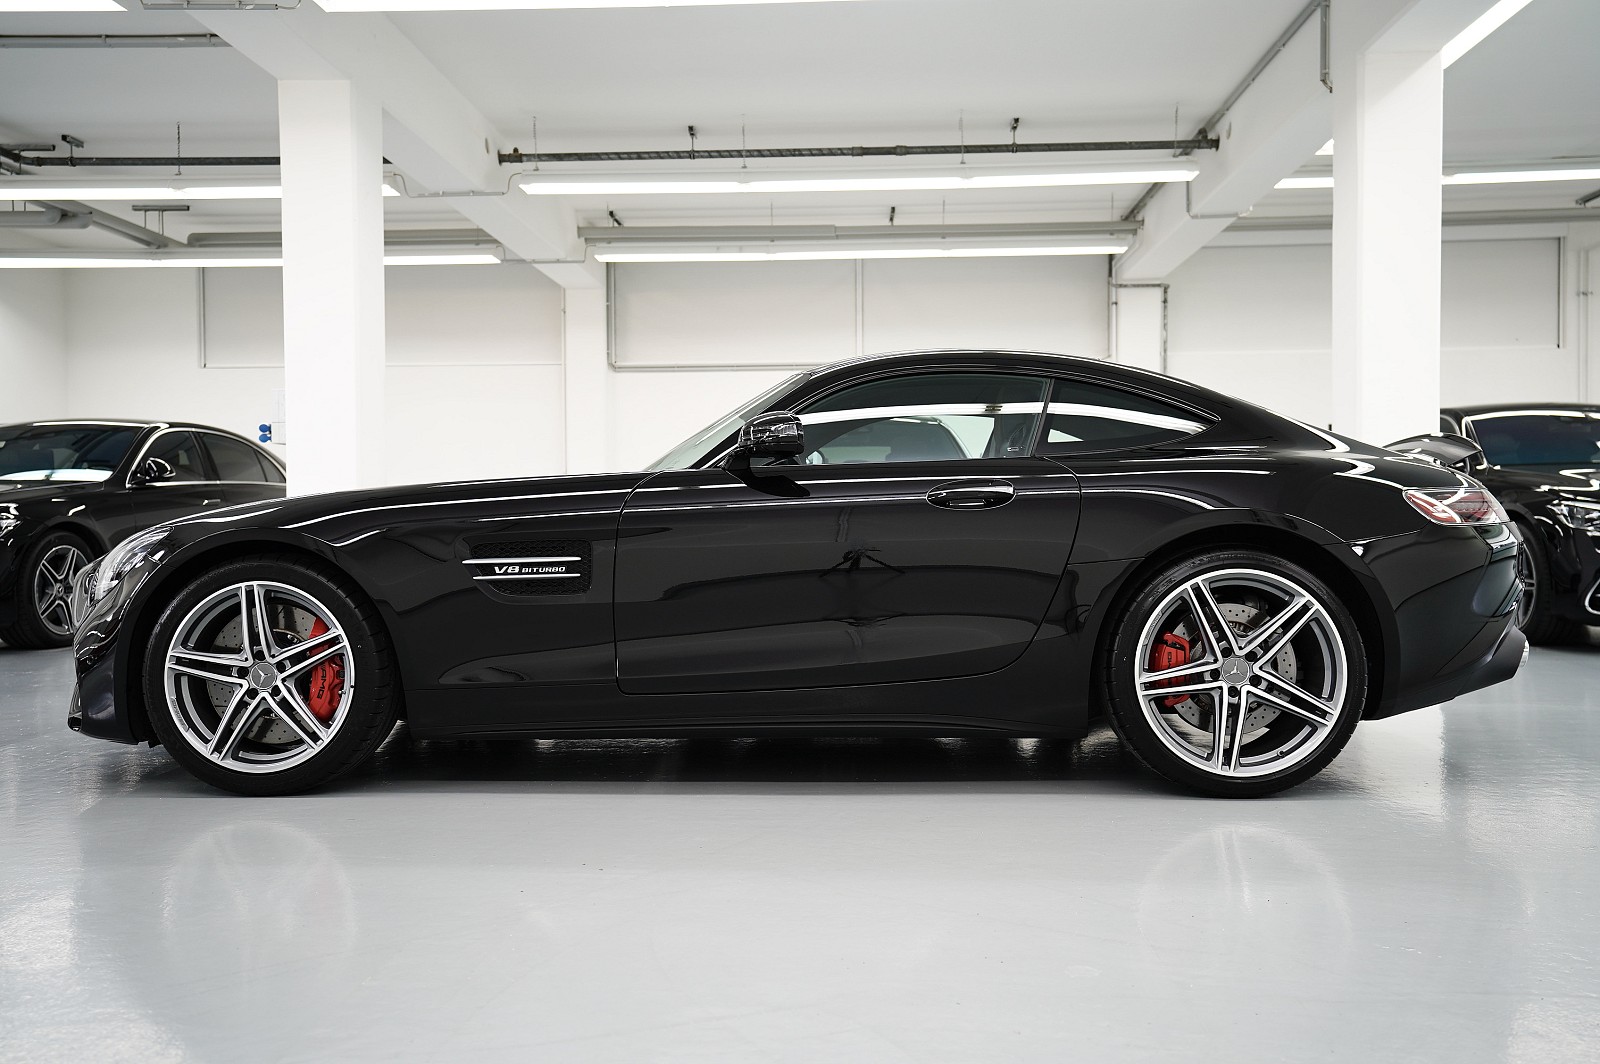 mercedes-amg gt PFERFORMANCE ABGAS/Exhaust ! 390 KW/530 PS - V/max 312 KM/H !